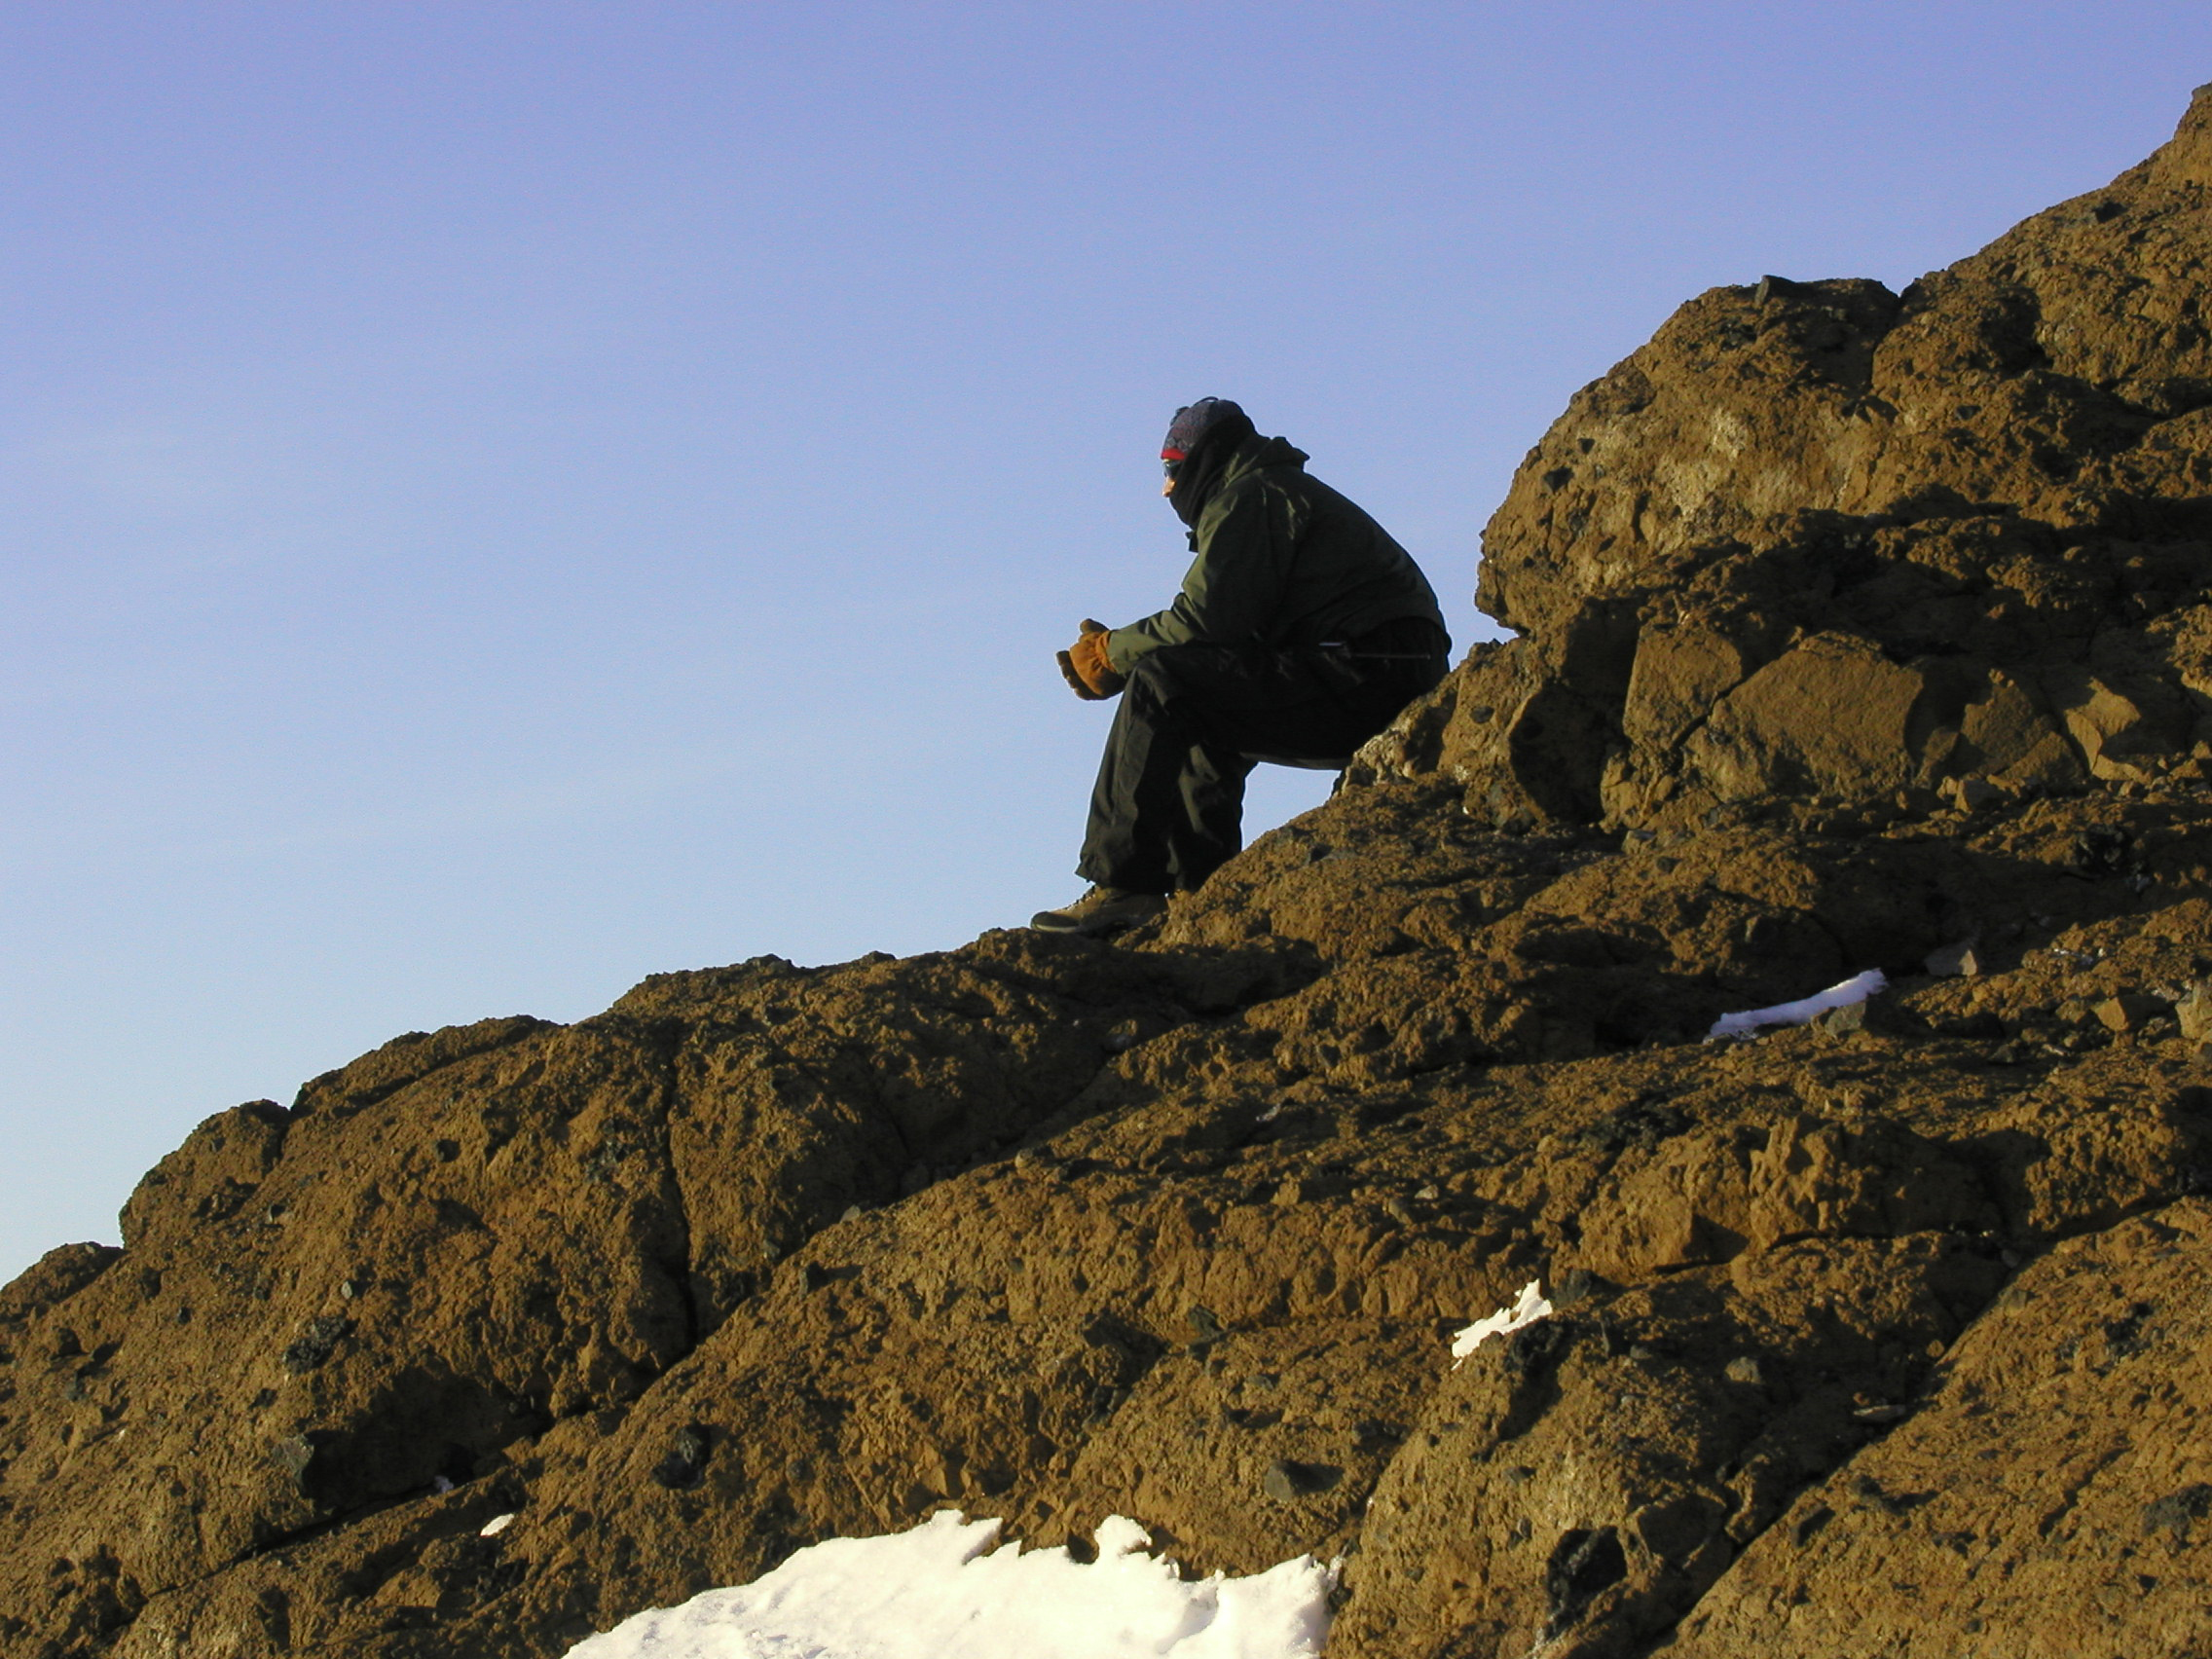 A person in profile sits on rocks.